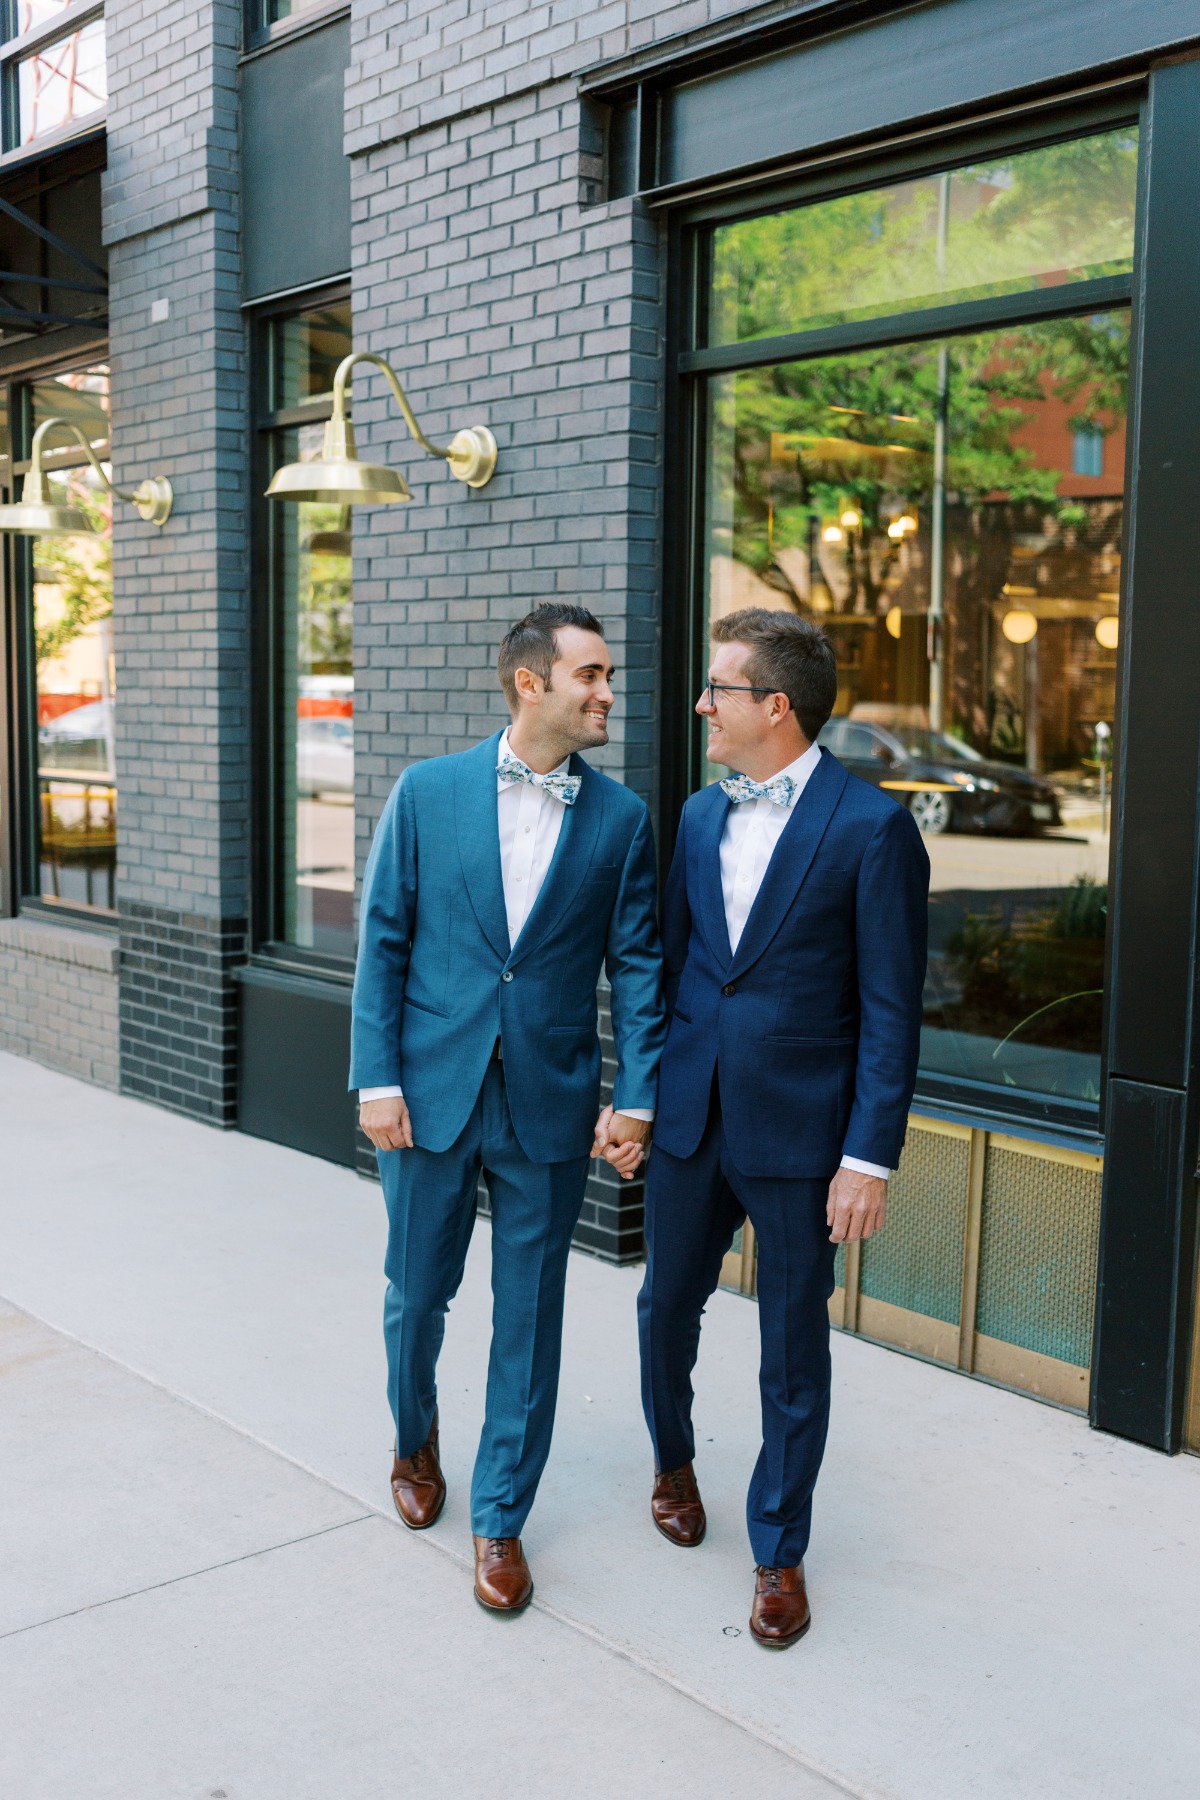 Stylish Denver grooms in custom blue suits with bow ties 